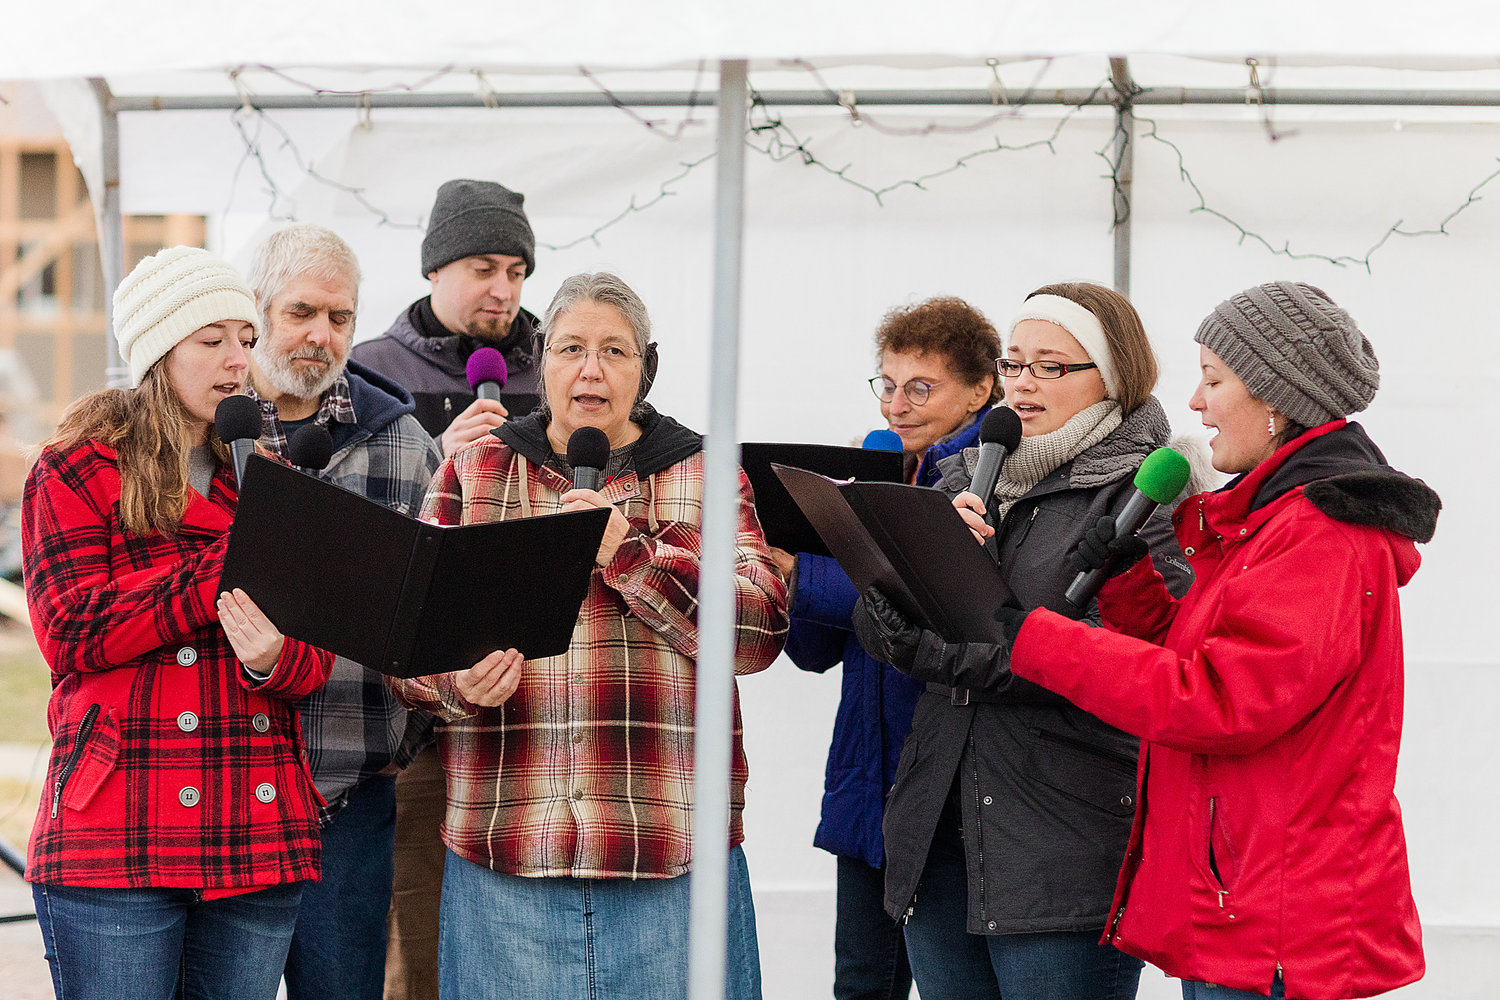 Nate Nisly’s singing group filled the air with caroling while attendees enjoyed cookies and hot chocolate provided by DJ’s Casual Café.